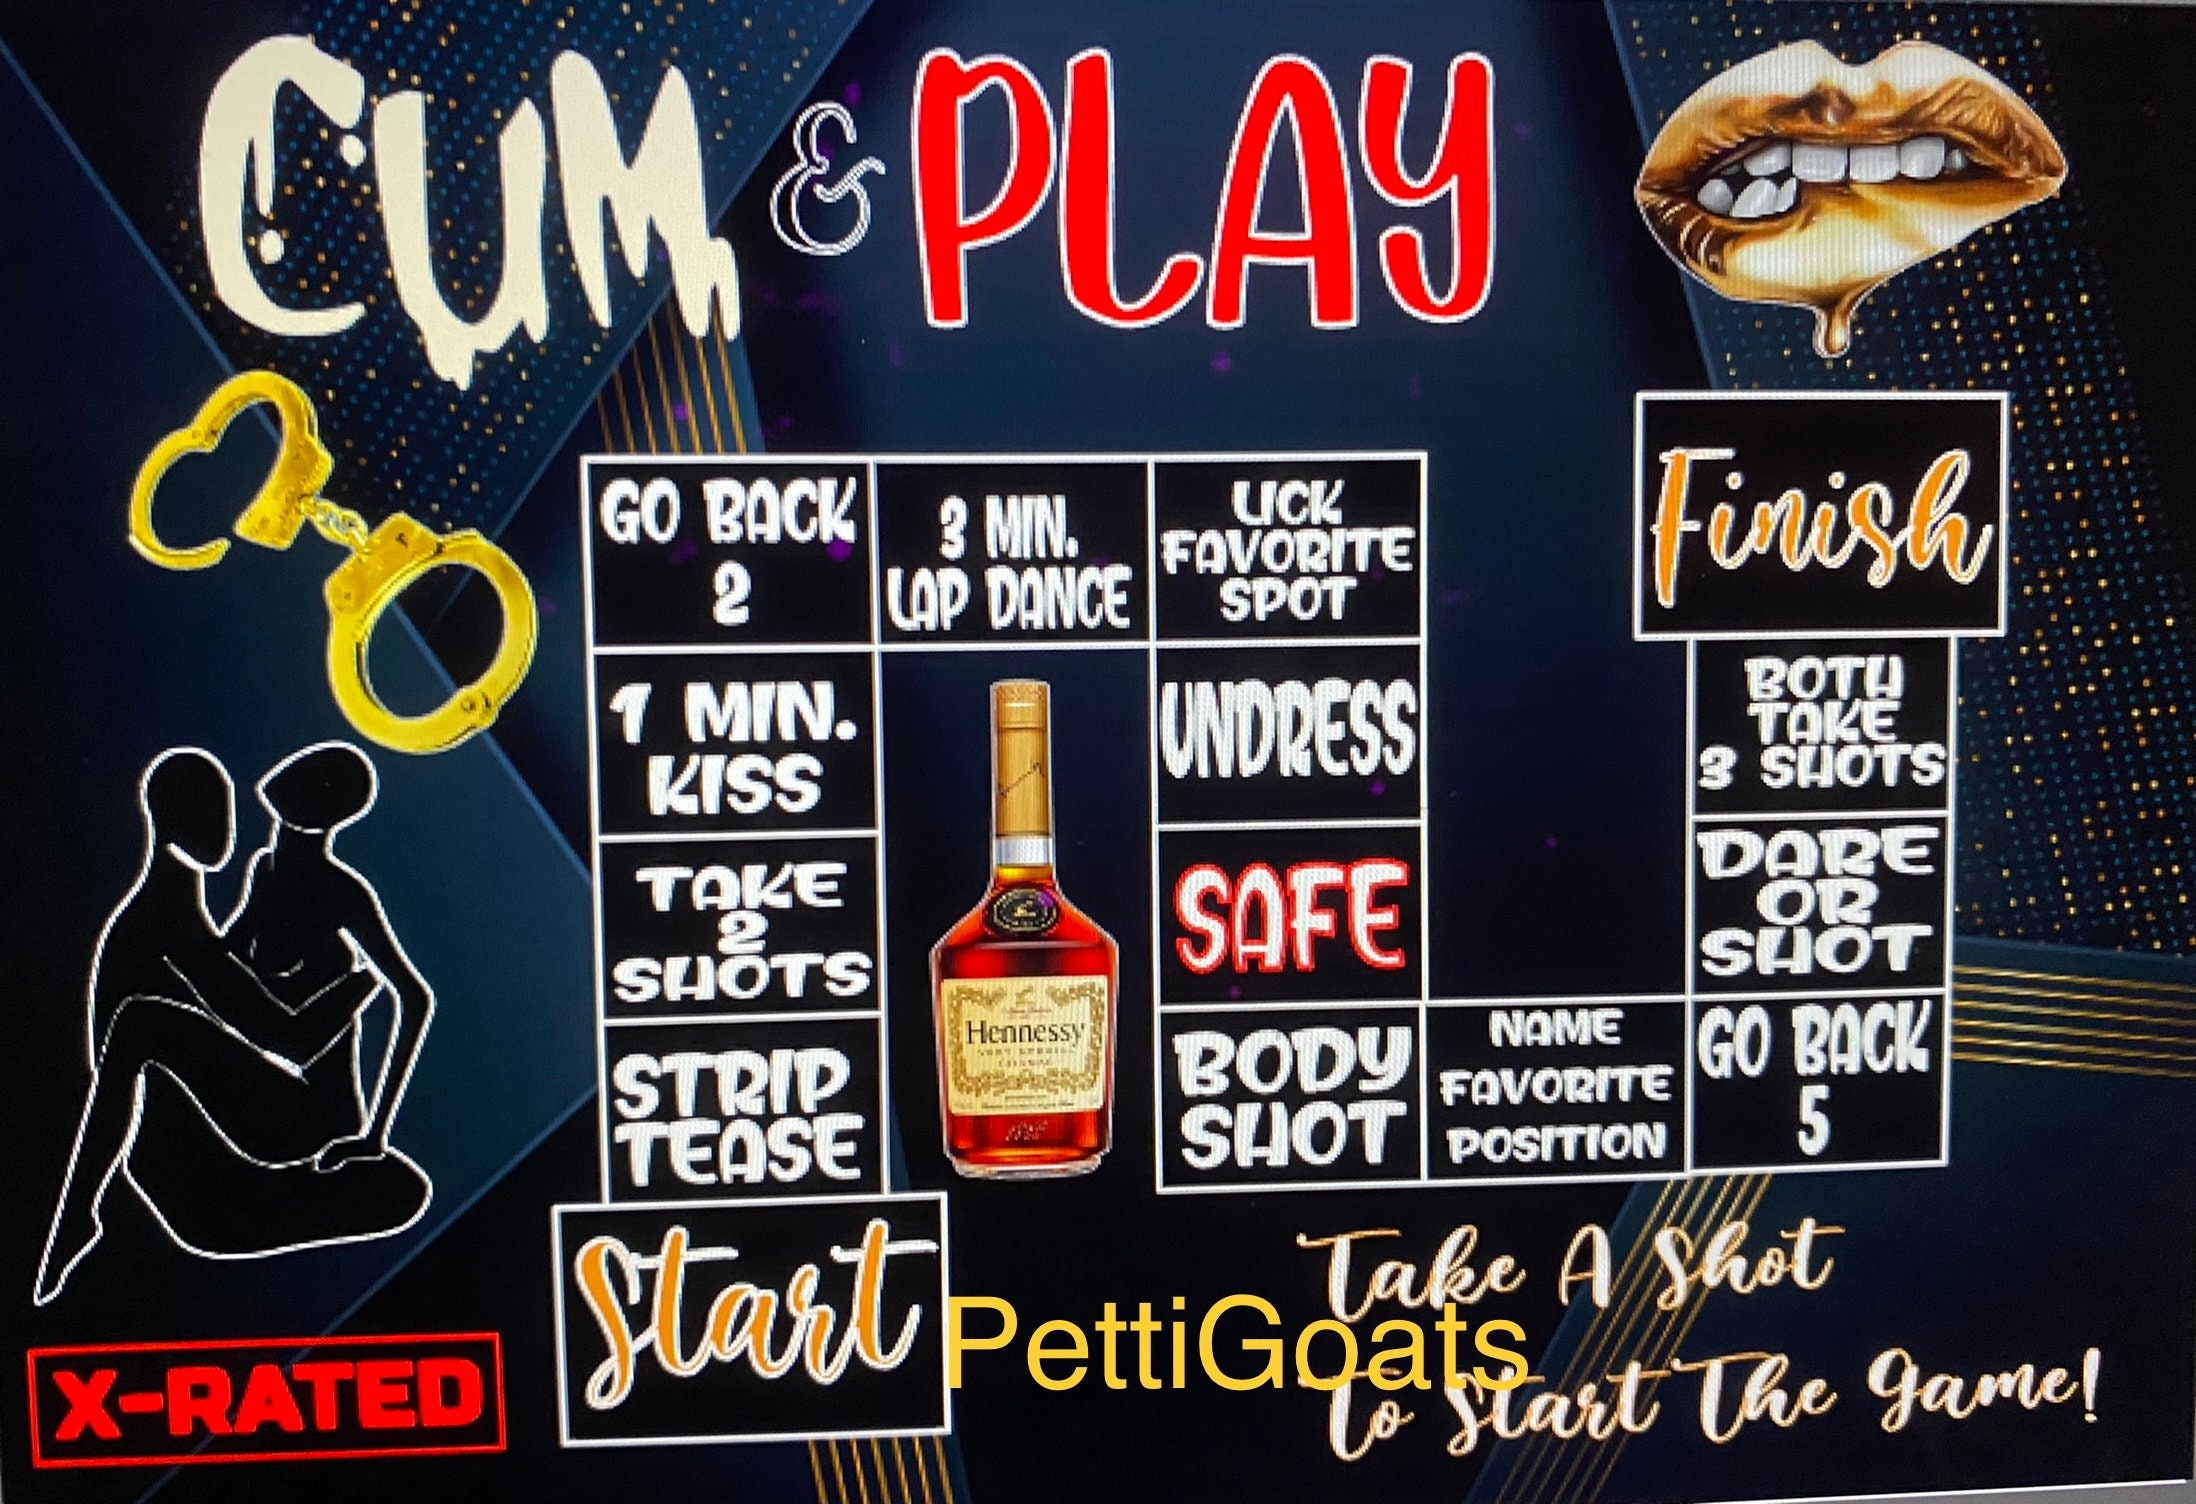 The Really Cheeky Adult Board Game For Friends – Adults Play